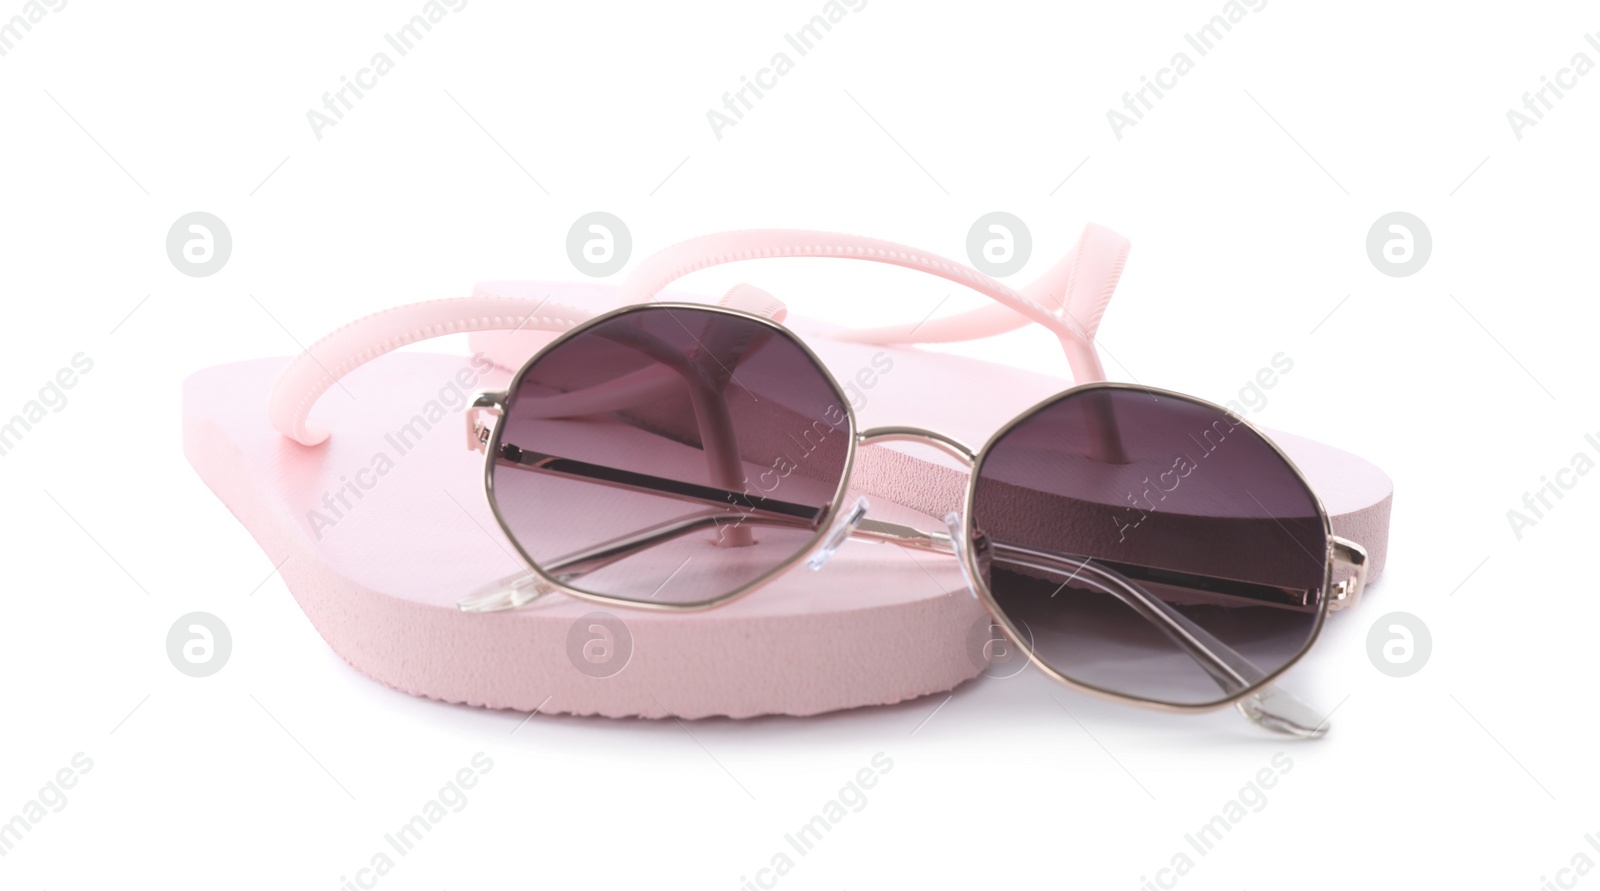 Photo of Flip flops and sunglasses on white background. Beach objects